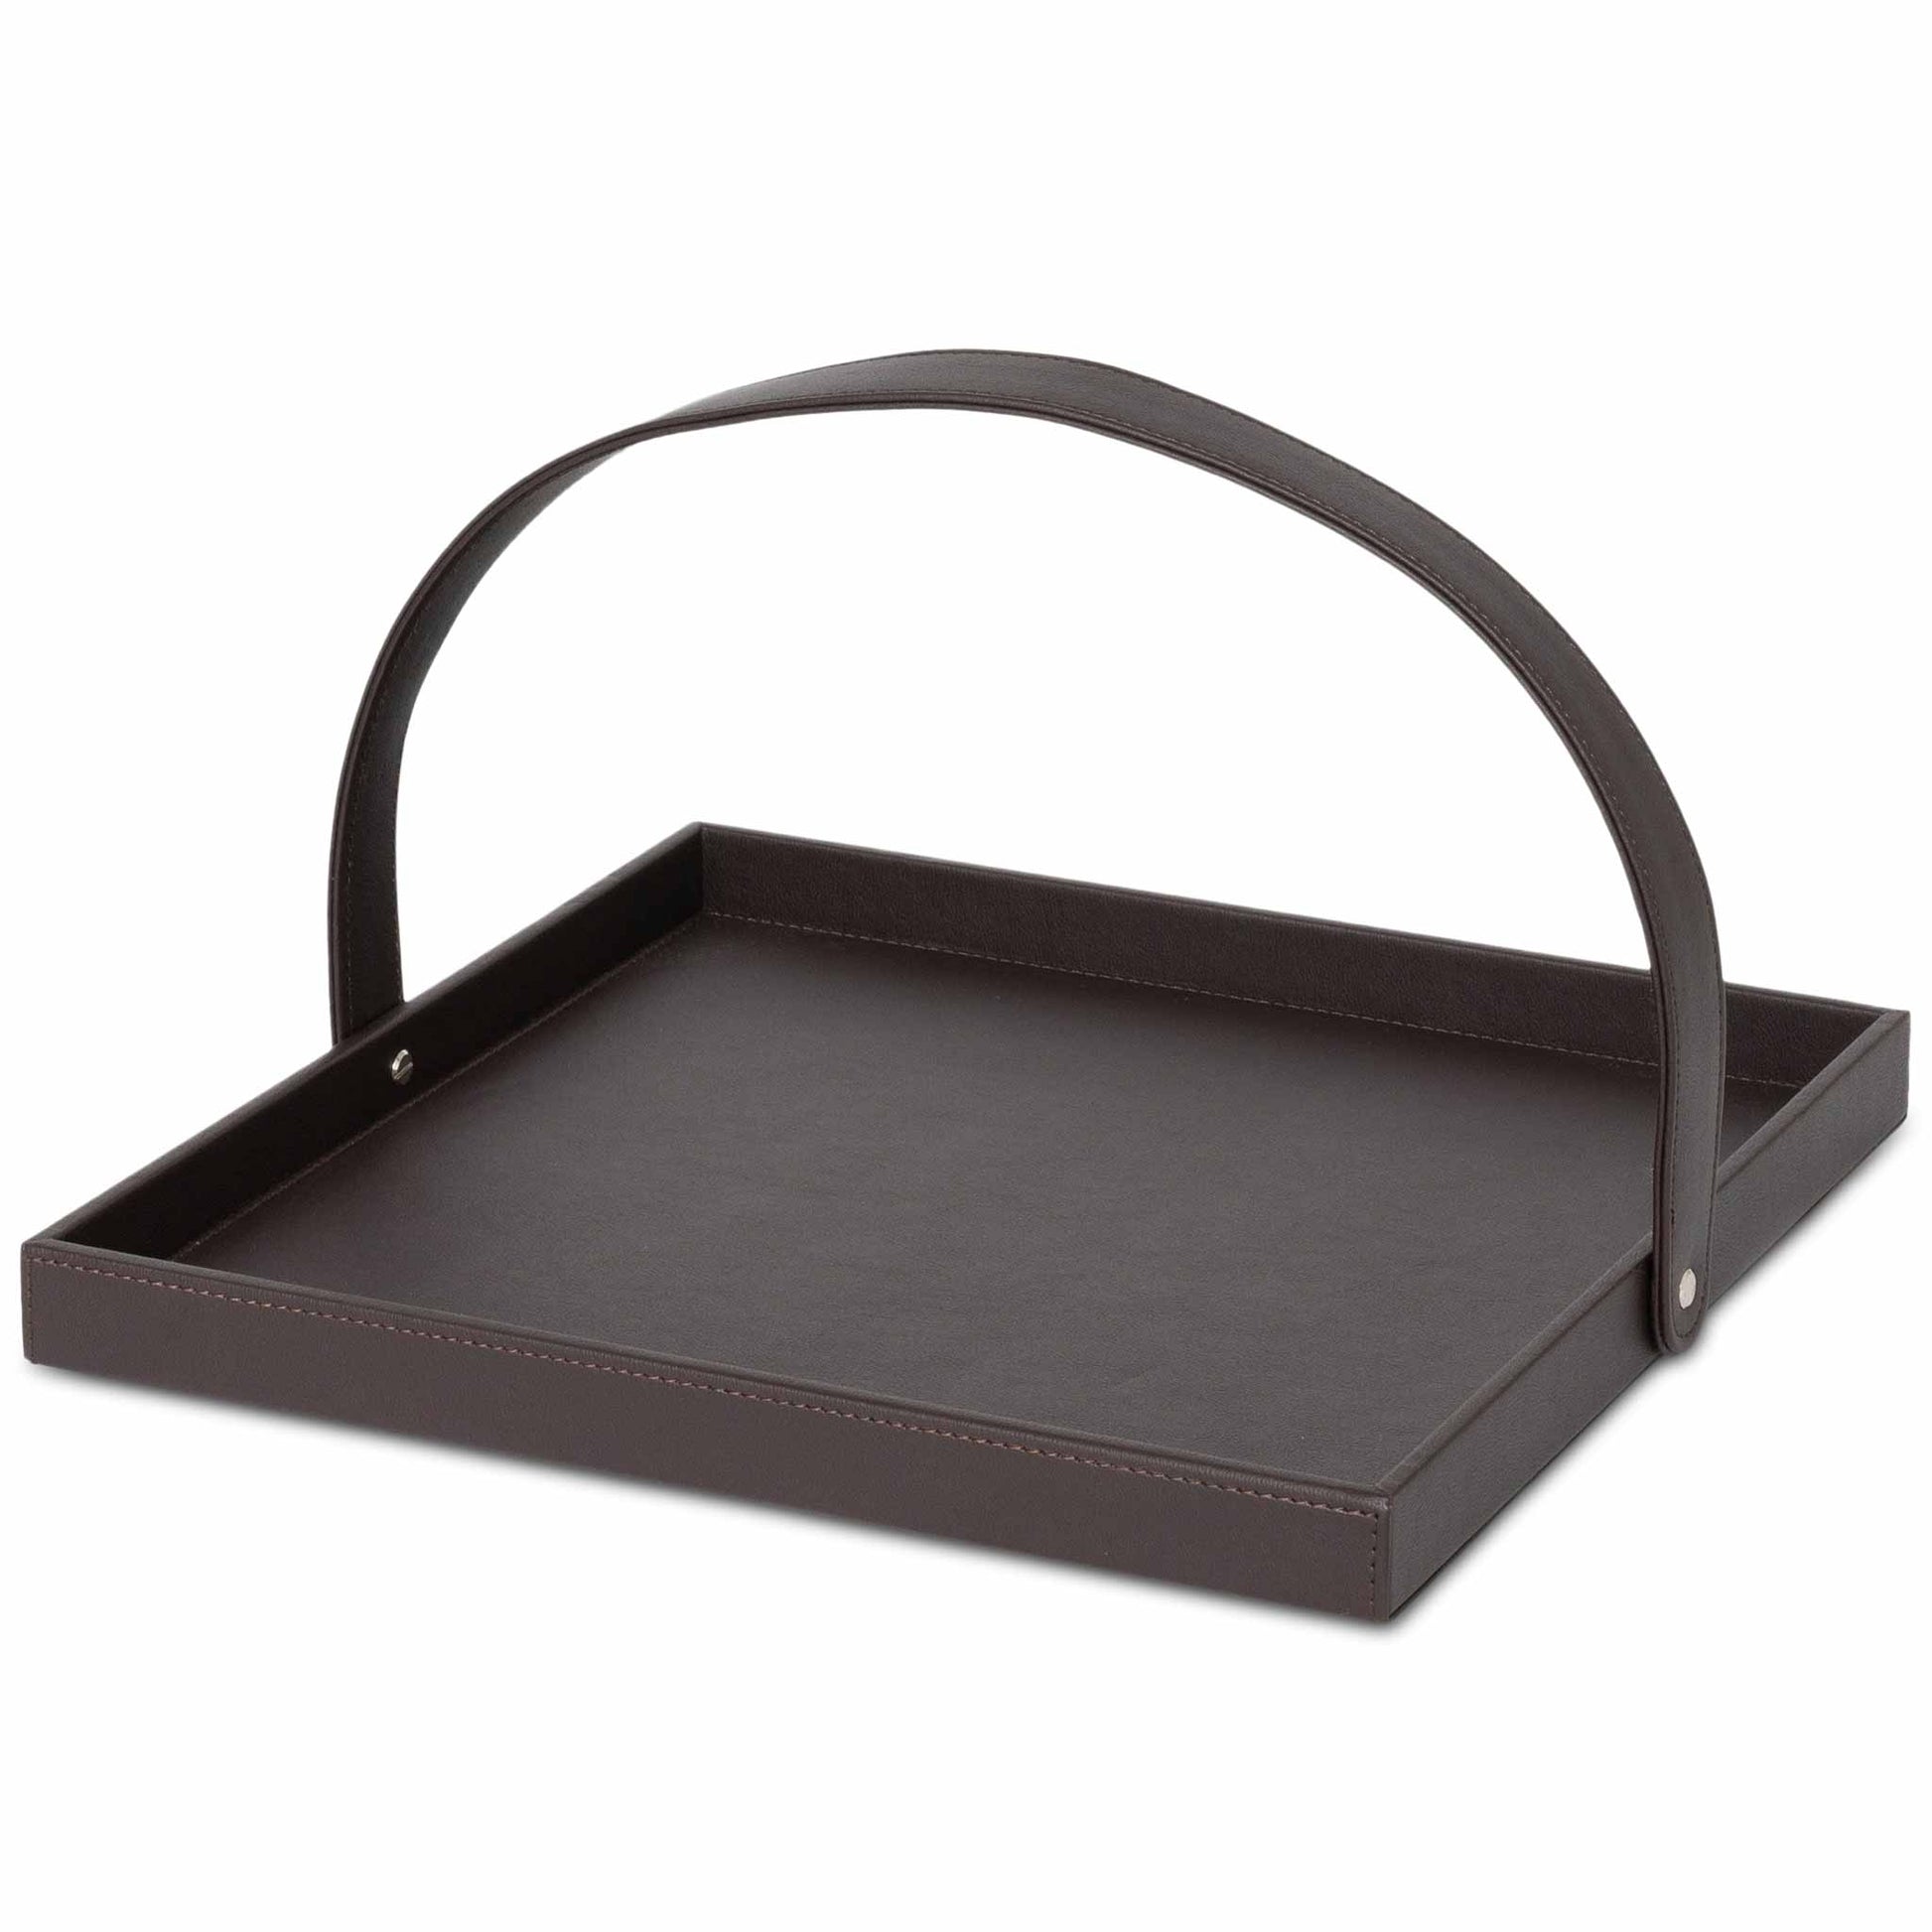 Bentley Flores hotel turndown tray brown leather angled